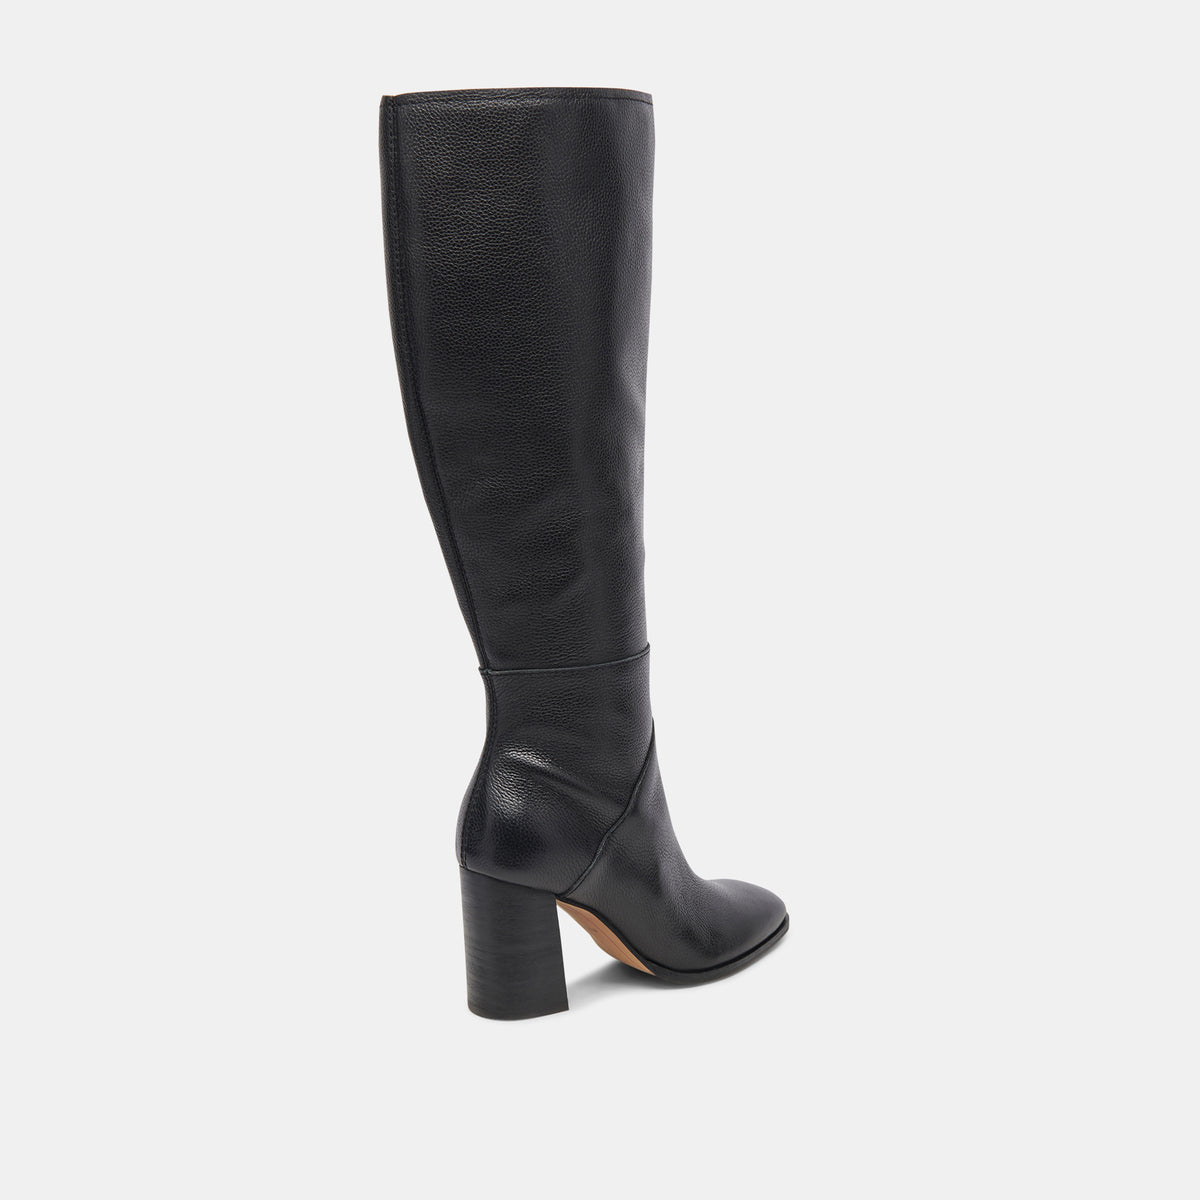 FYNN Wide Calf Boots Onyx Leather | Women's Onyx Knee-High Boots ...